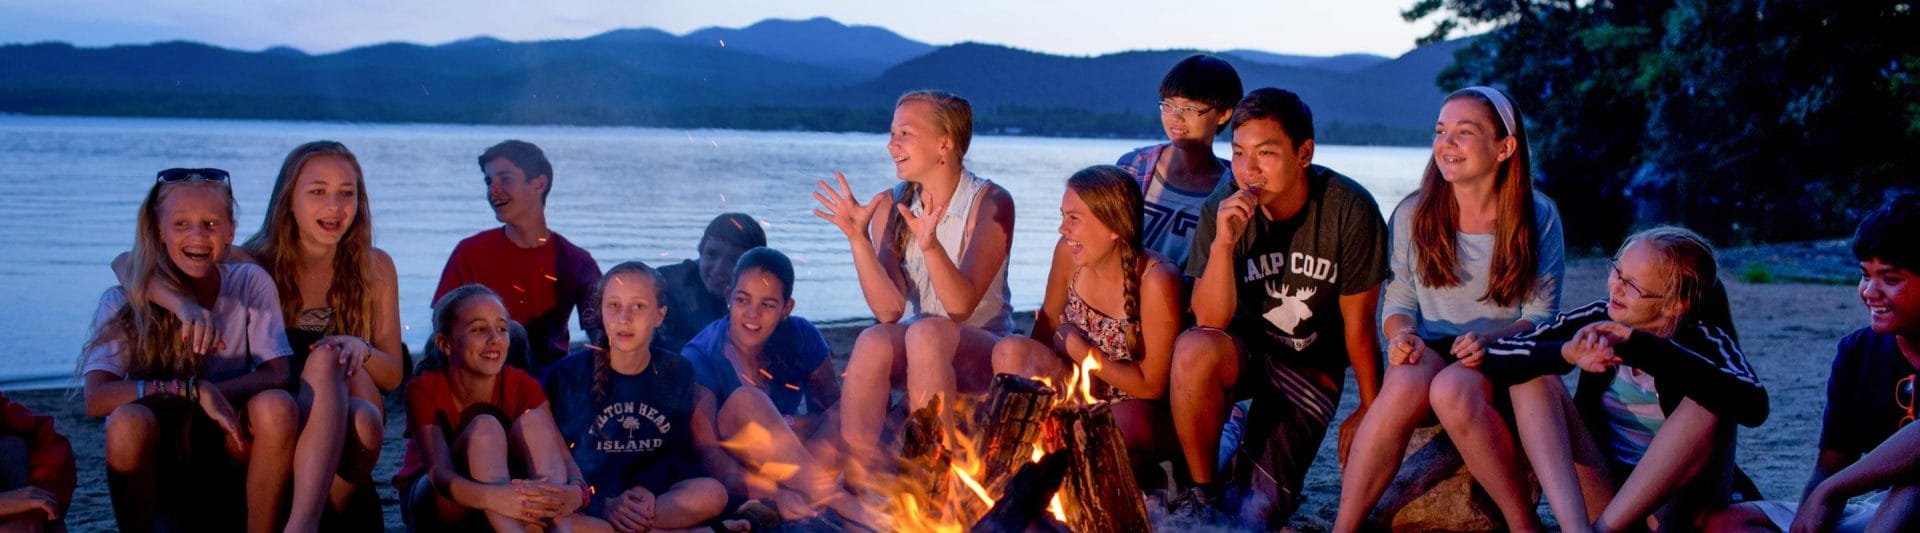 campers smiling around a campfire